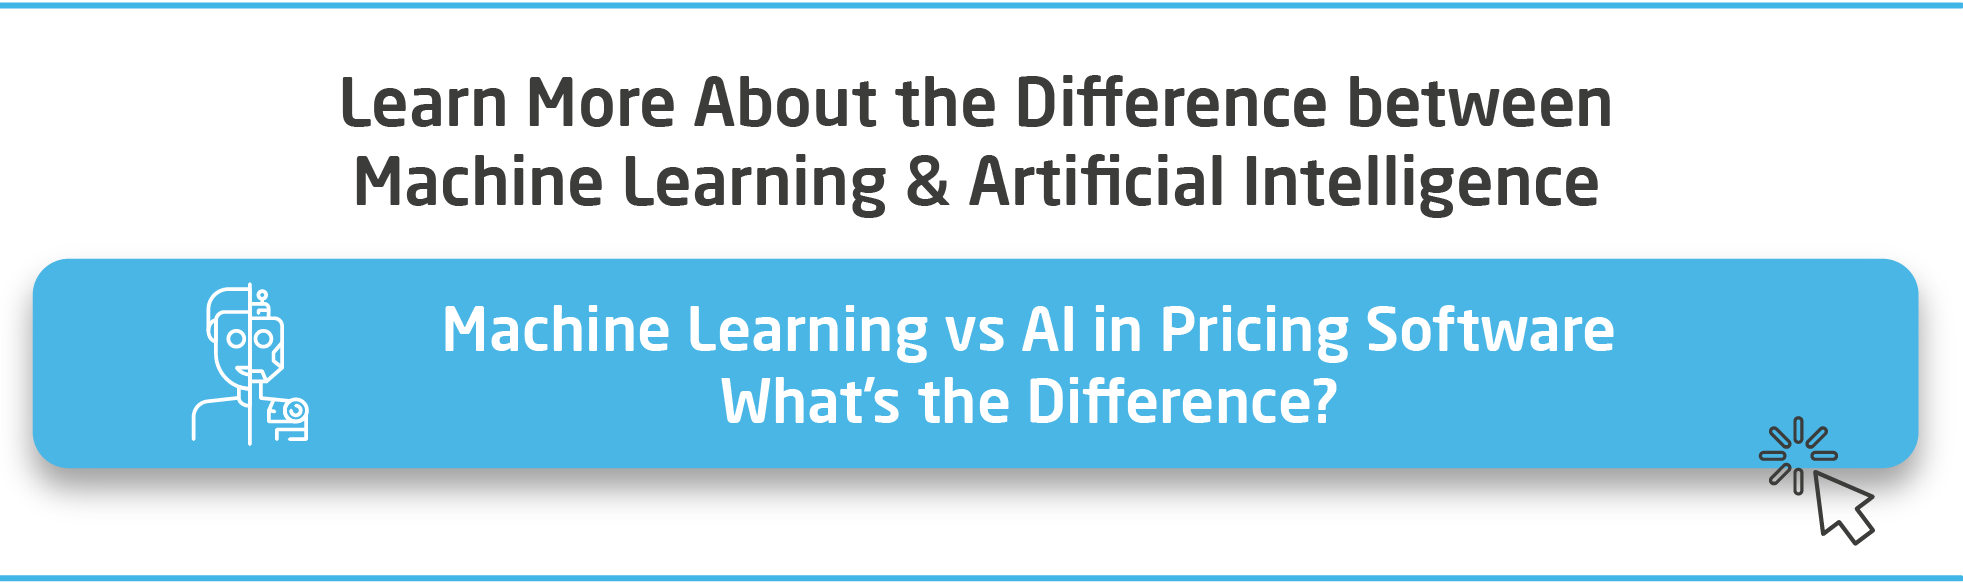 CTA-Whats-The-Difference-Between-ML-and-AI in Pricing-Software